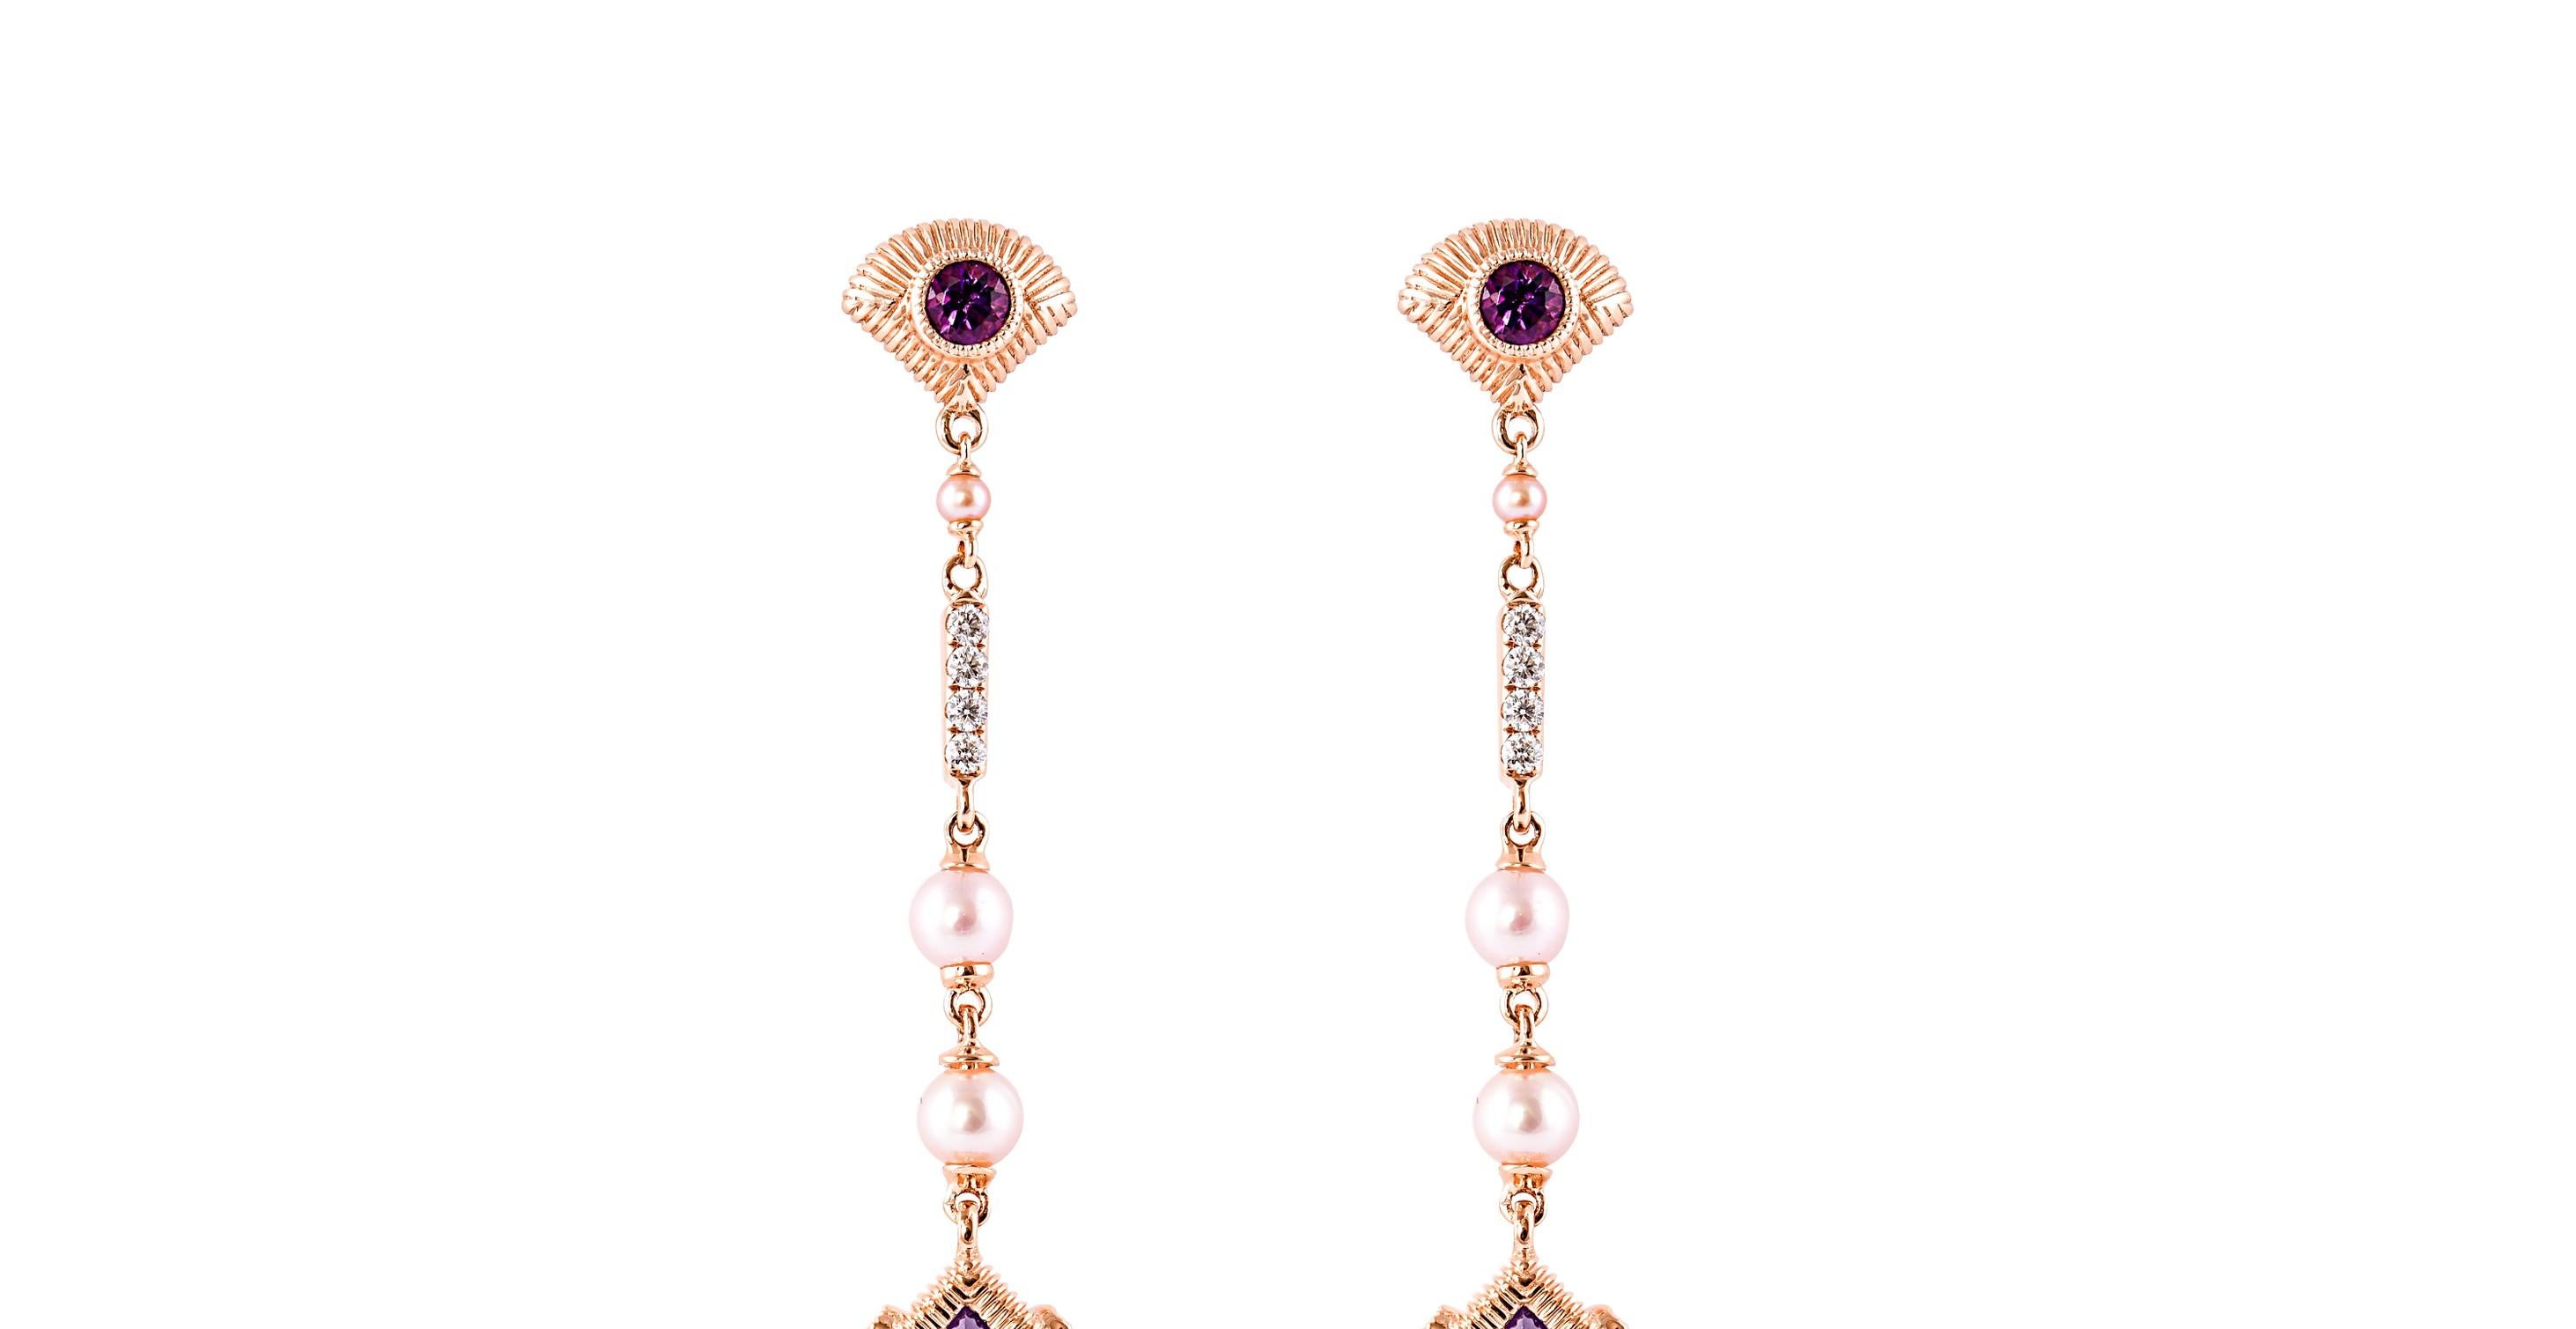 Sunita Nahata presents a series of 'Healing Hexagon' Earrings made to wear everyday and bring harmony to the mind, body and soul. 

This is an alluring amethyst earring and this gemstone is particularly known to bring powerful energies to Aquarians